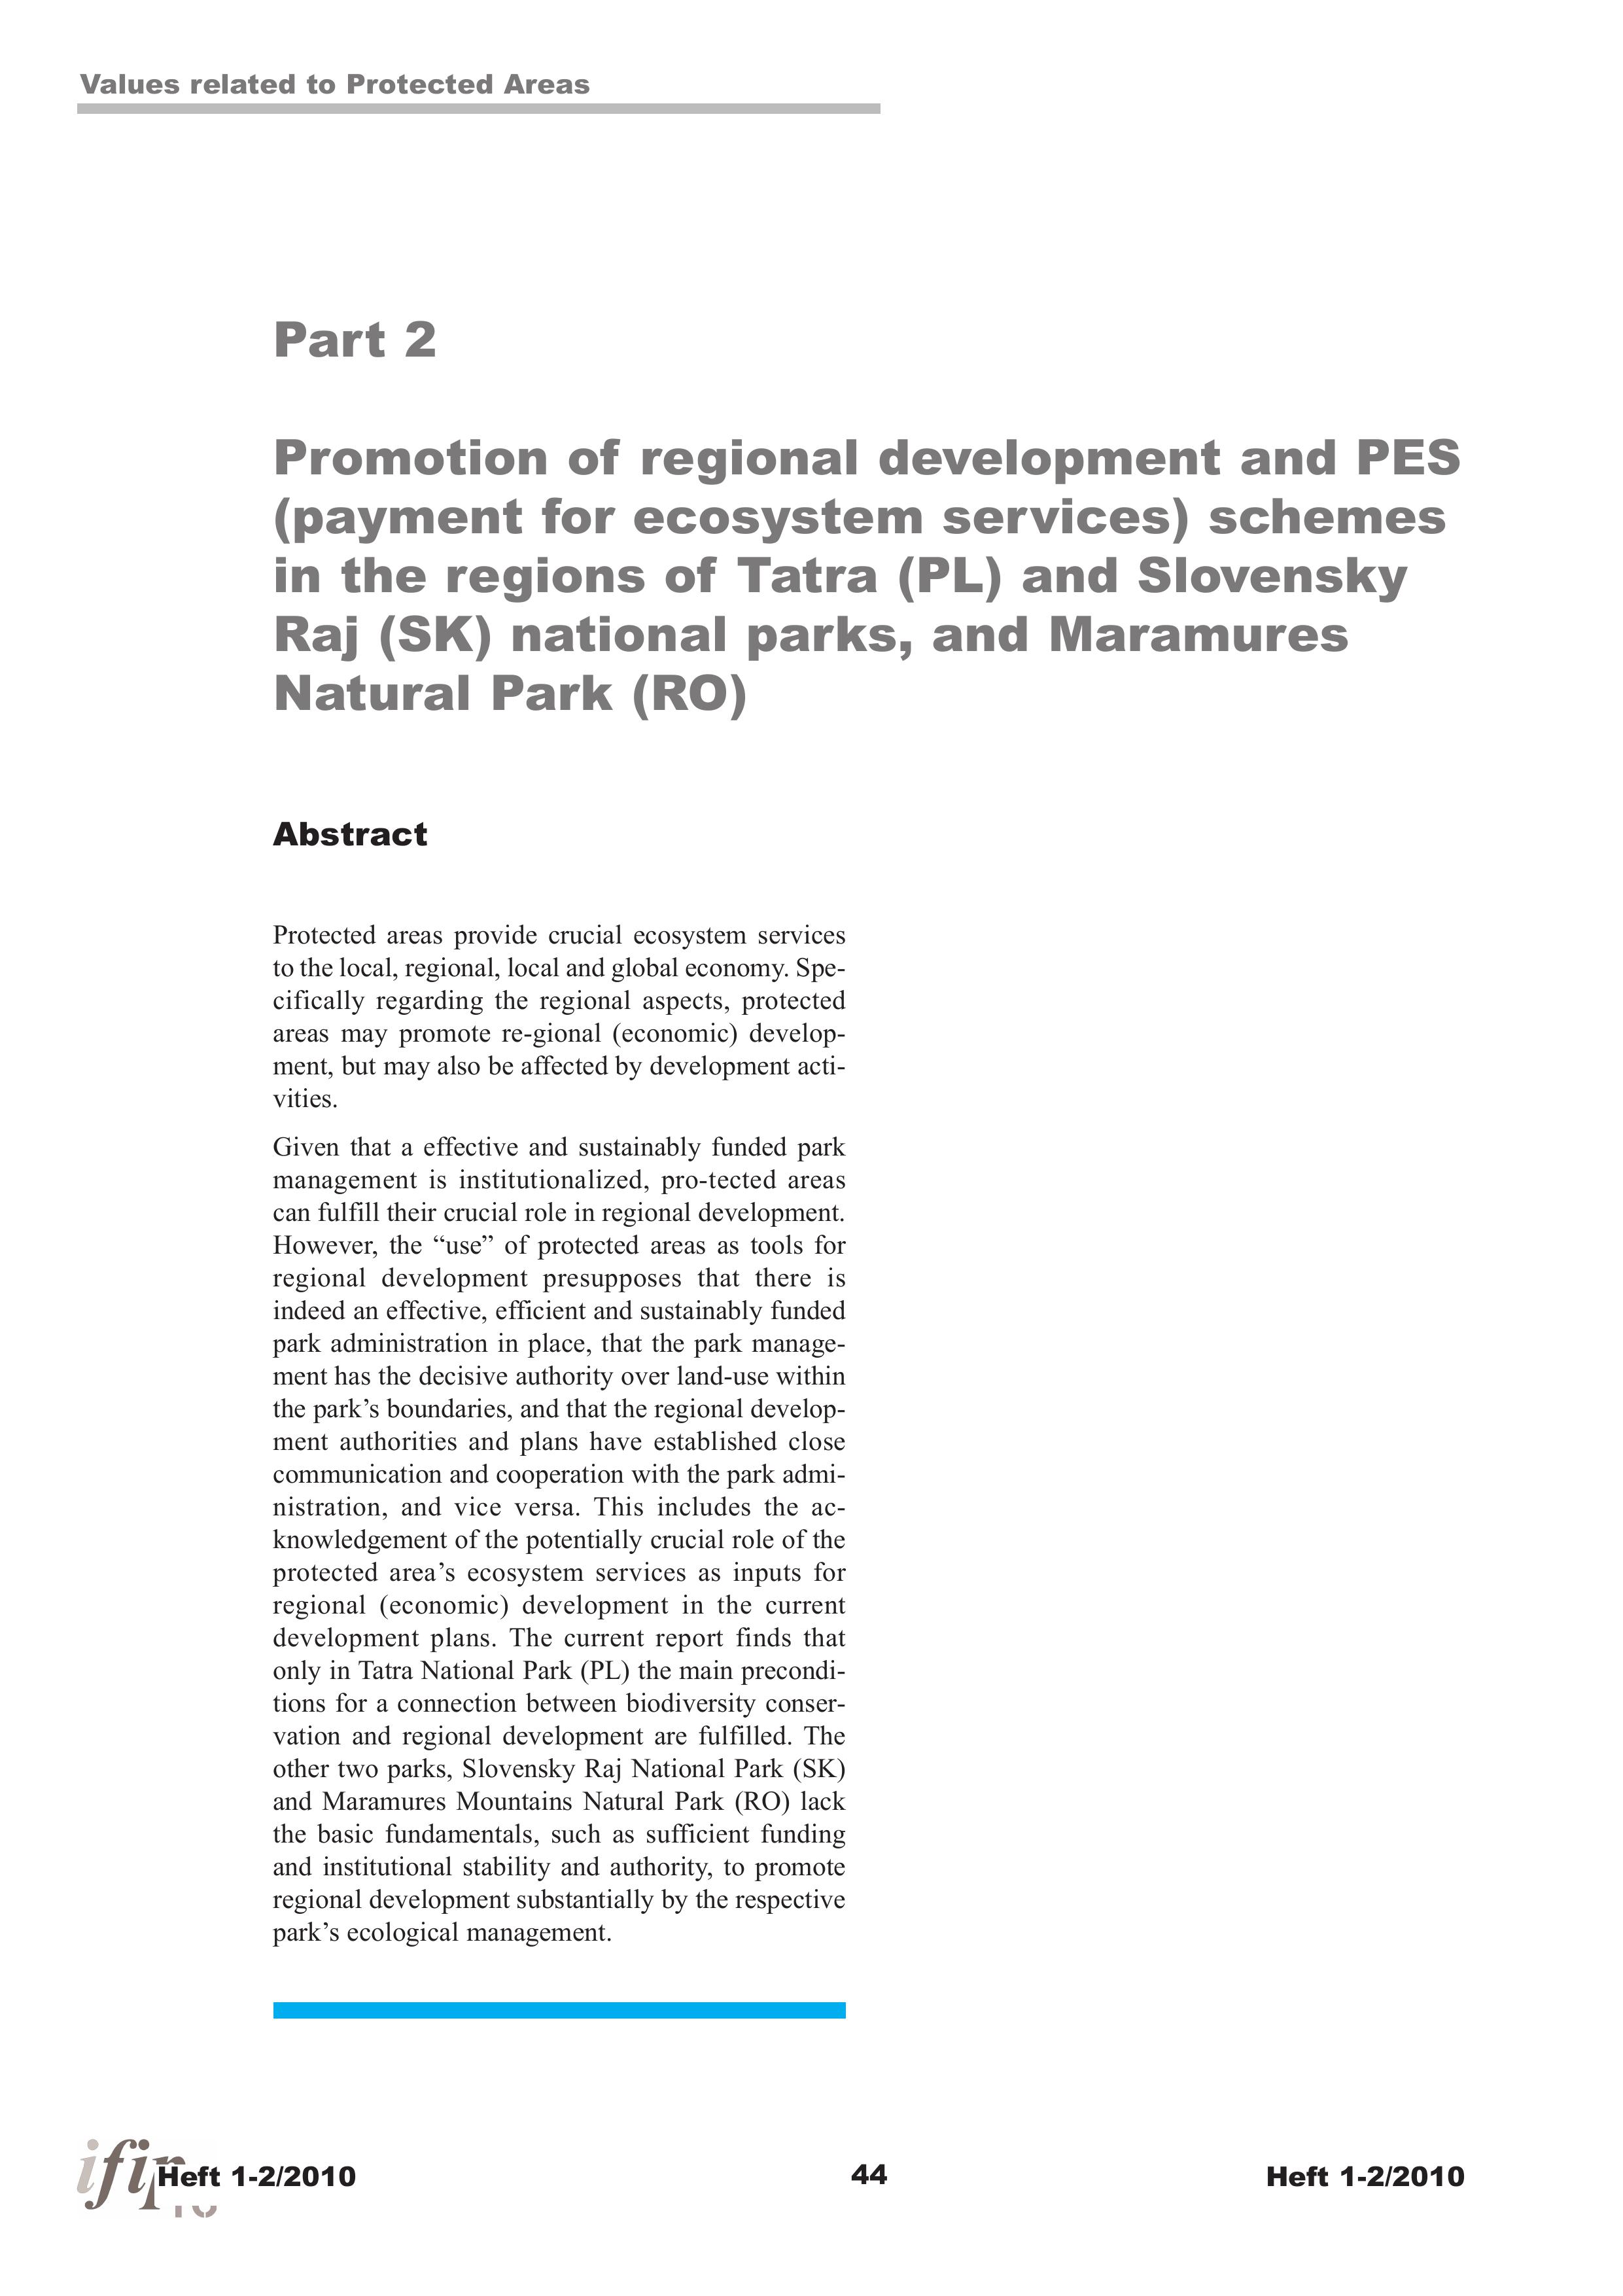 Economic and cultural values related to Protected Areas - Part 2: Promotion of regional development and PES (payment for ecosystem services) schemes in the regions of Tatra (PL) and Slovensky Raj (SK) national parks, and Maramures Natural Park (RO)